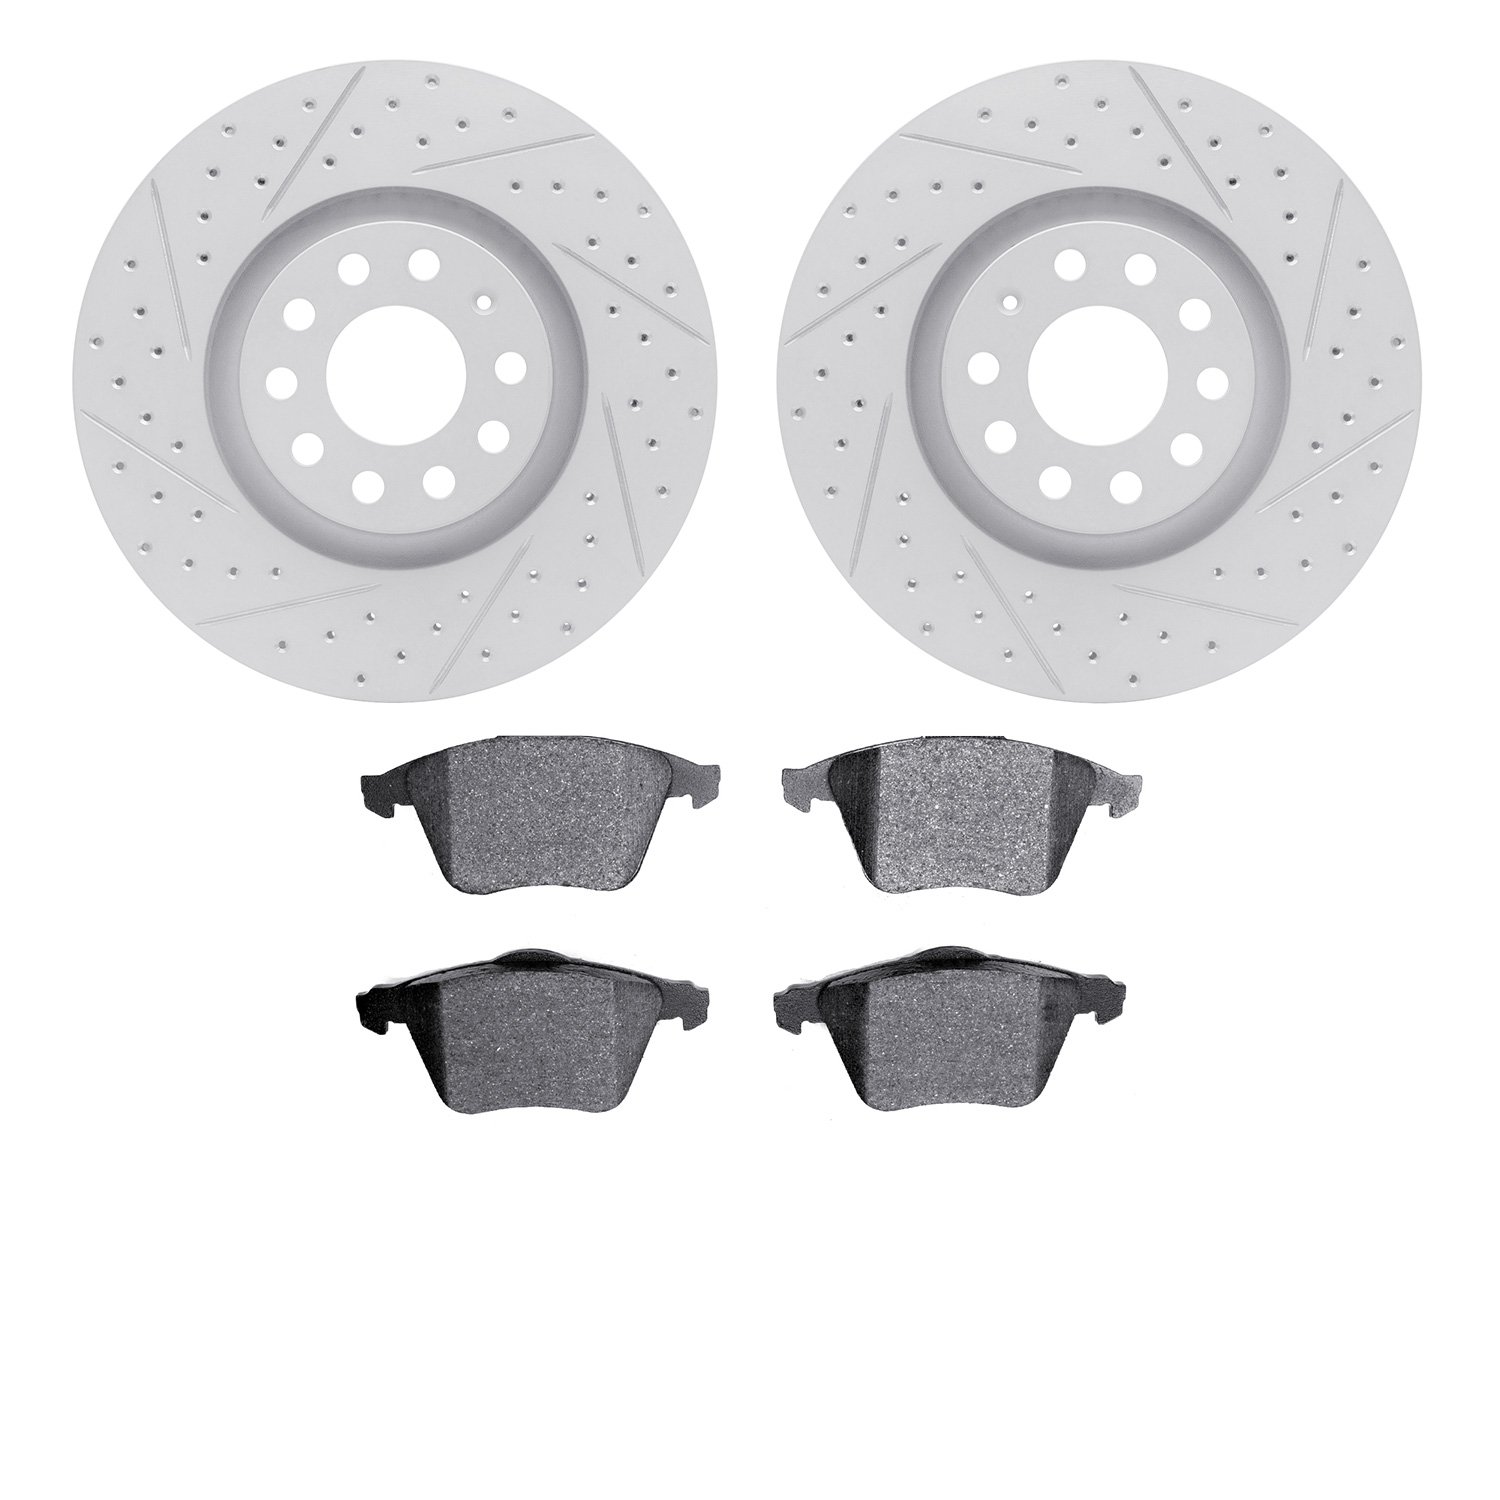 2502-73024 Geoperformance Drilled/Slotted Rotors w/5000 Advanced Brake Pads Kit, 2001-2005 Audi/Volkswagen, Position: Front